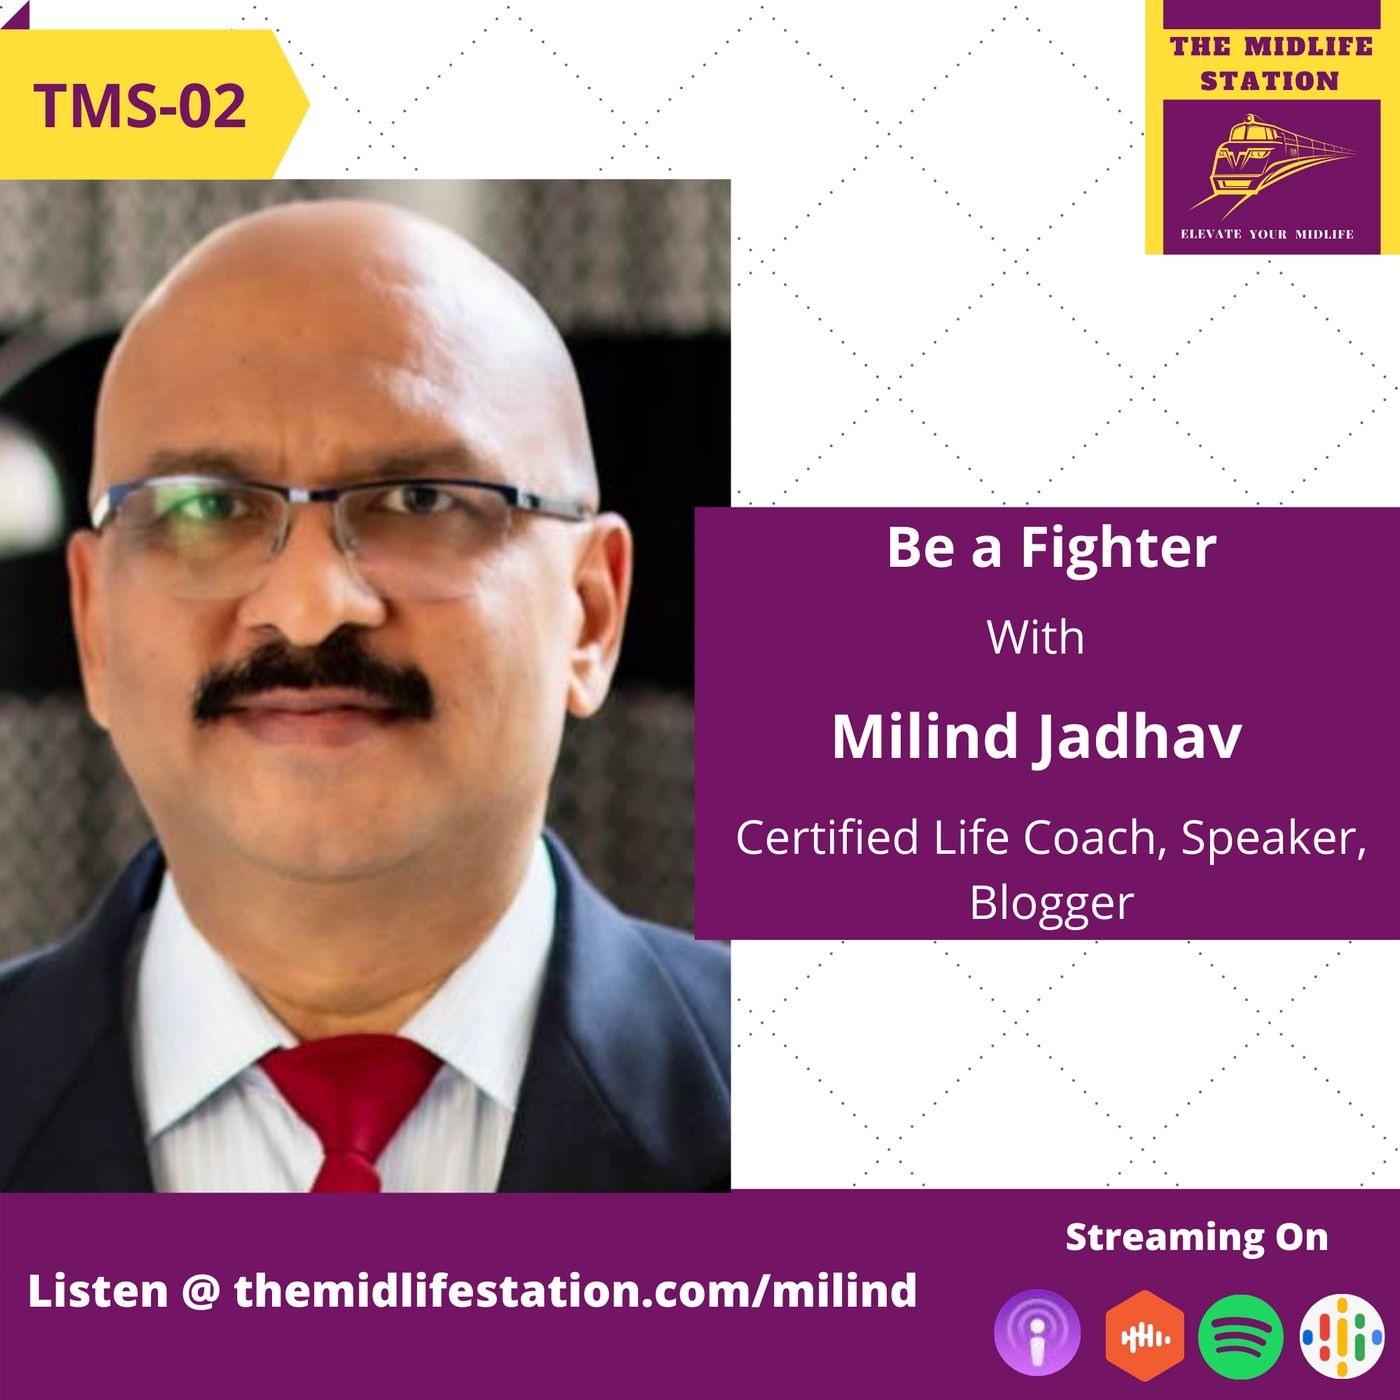 Be a Midlife Warrior with Milind Jadhav:TMS02